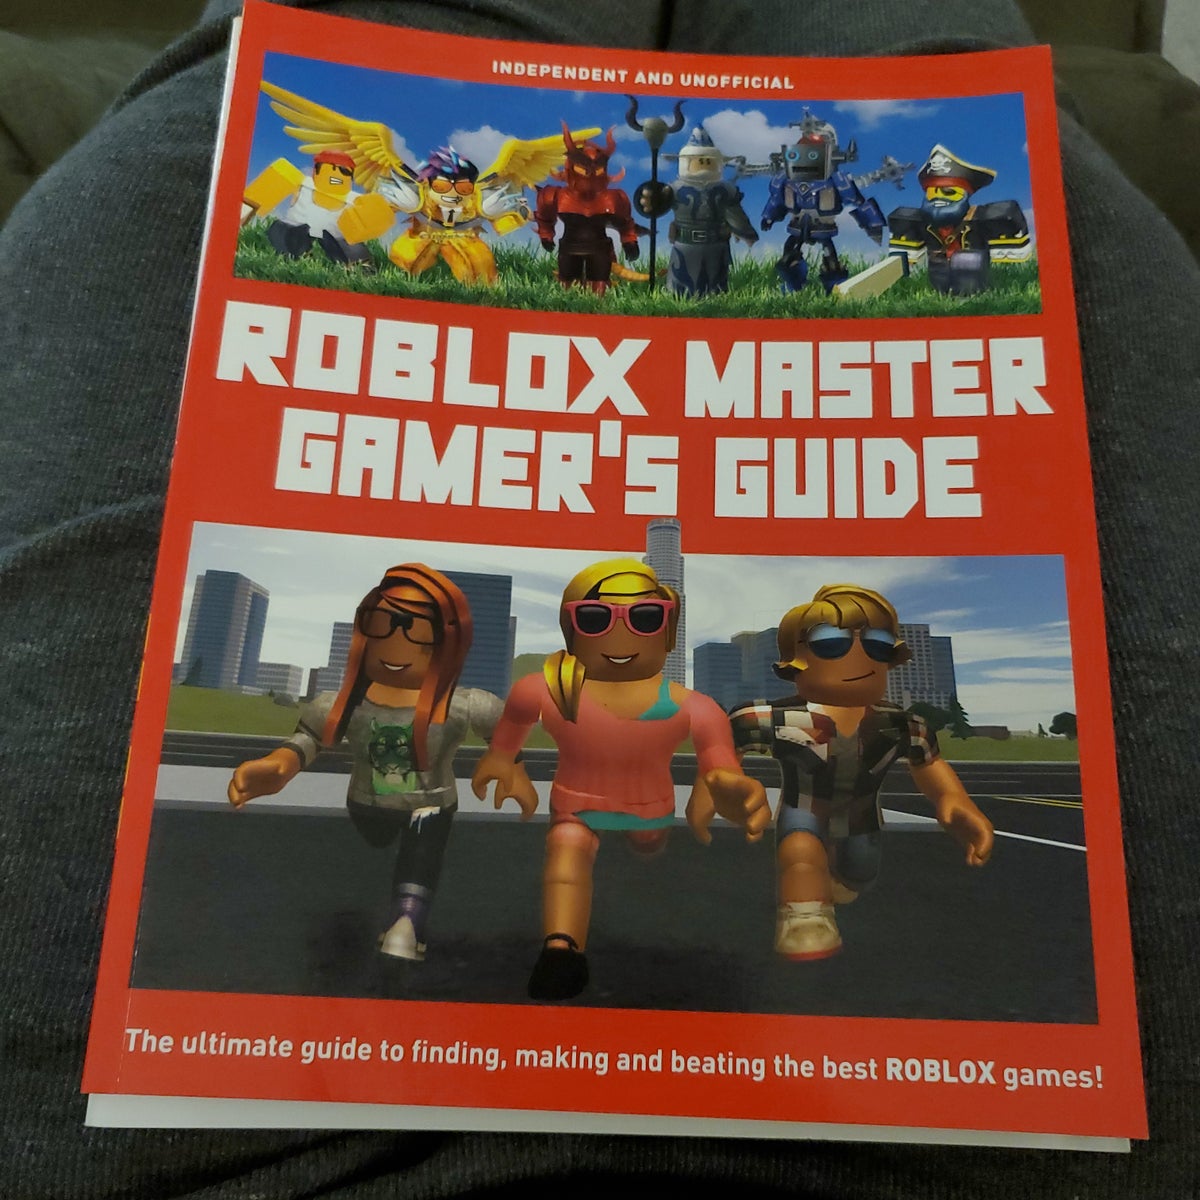 Master Builder Roblox : The Essential Guide by Triumph Books Staff (2017,  Trade Paperback) for sale online